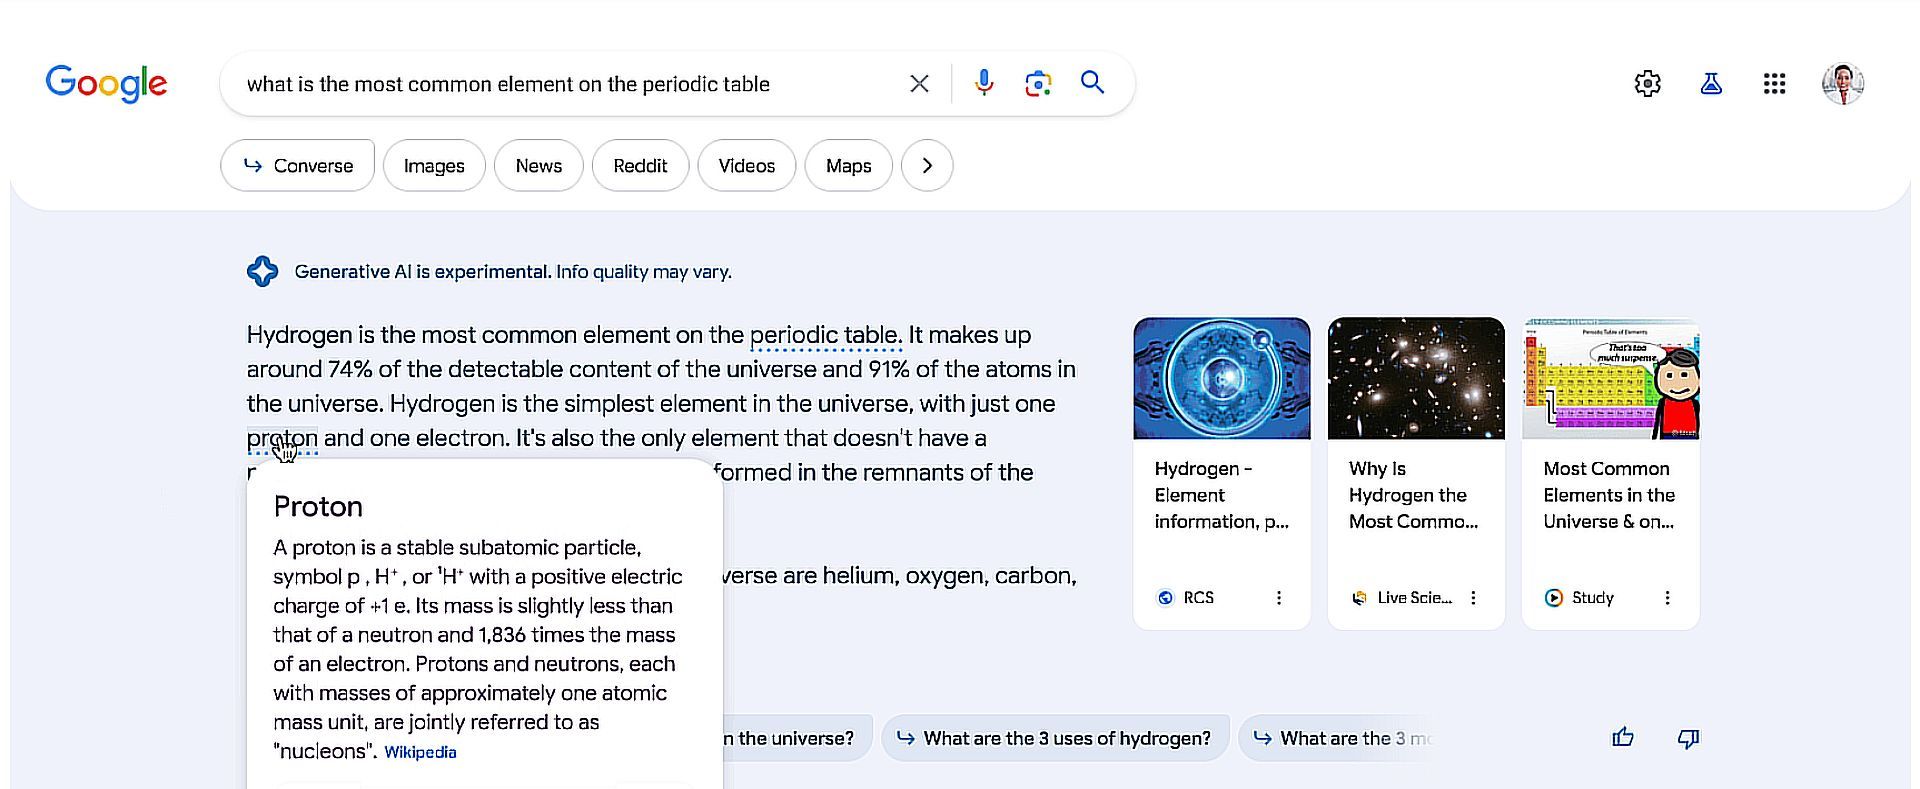 What is Google SGE and how to use it? Revolutionizing search with generative AI. Engage, create, and discover information in a whole new way!